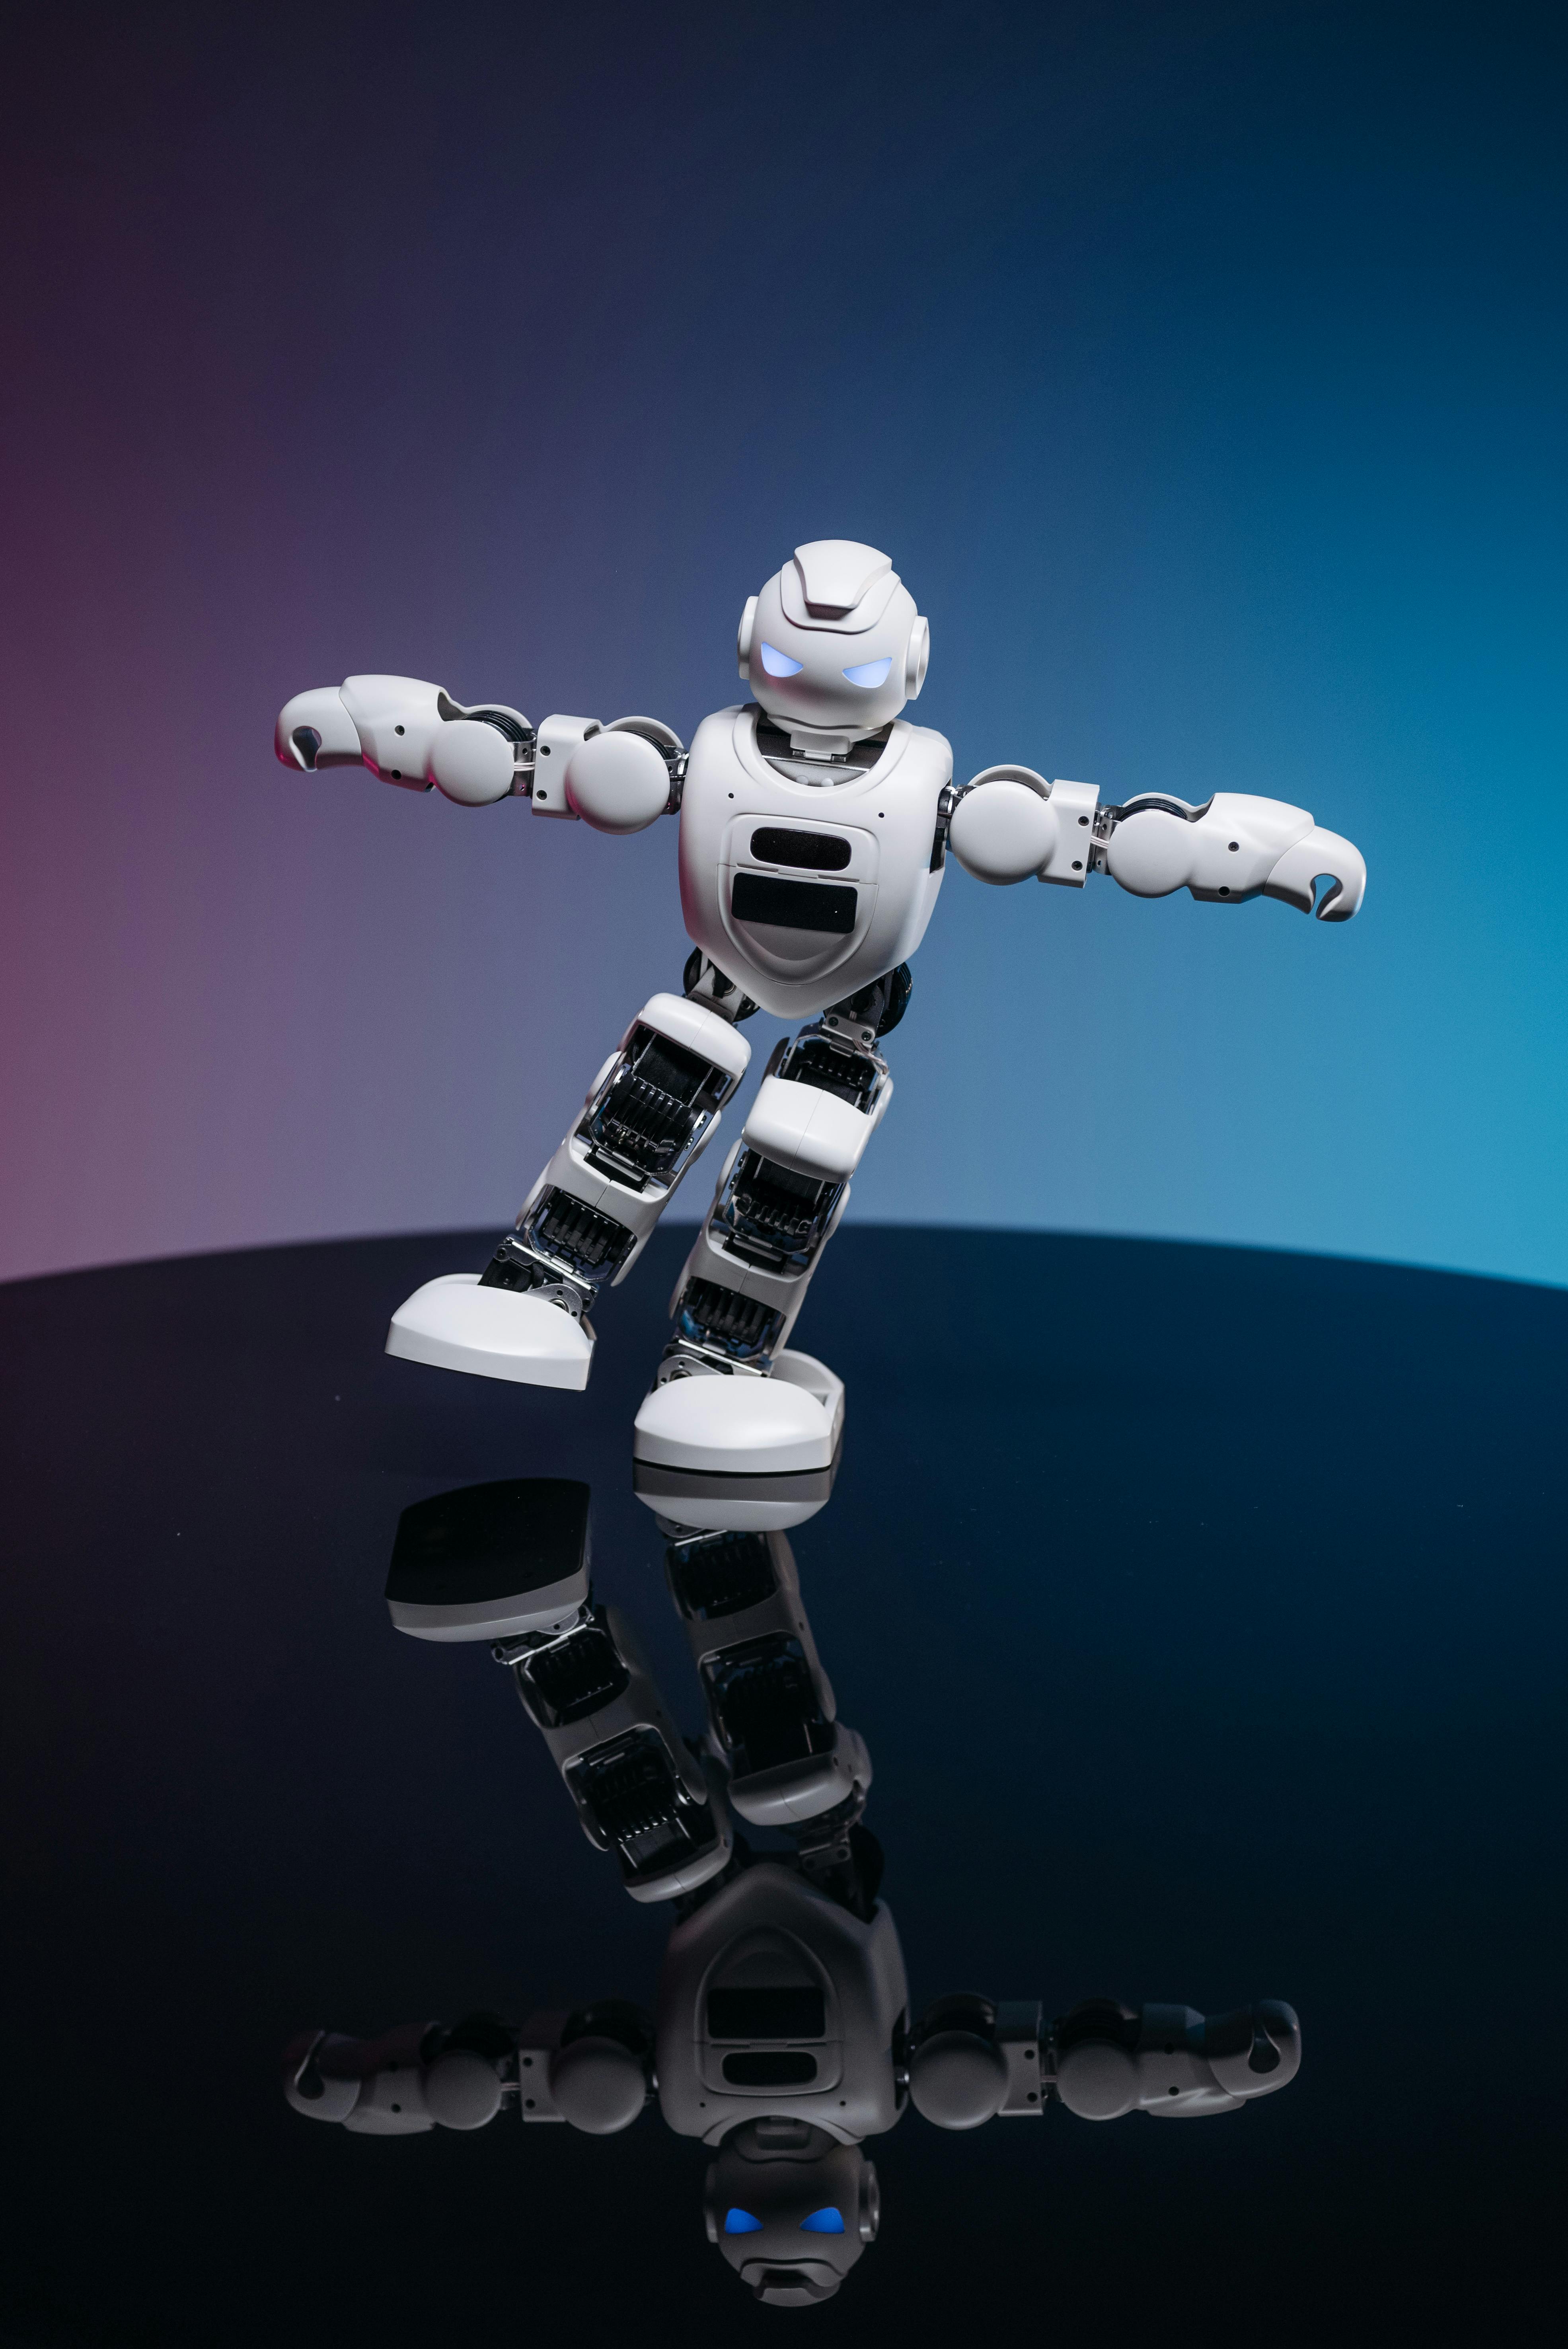 Photos, Download The BEST Free Robot Stock Images